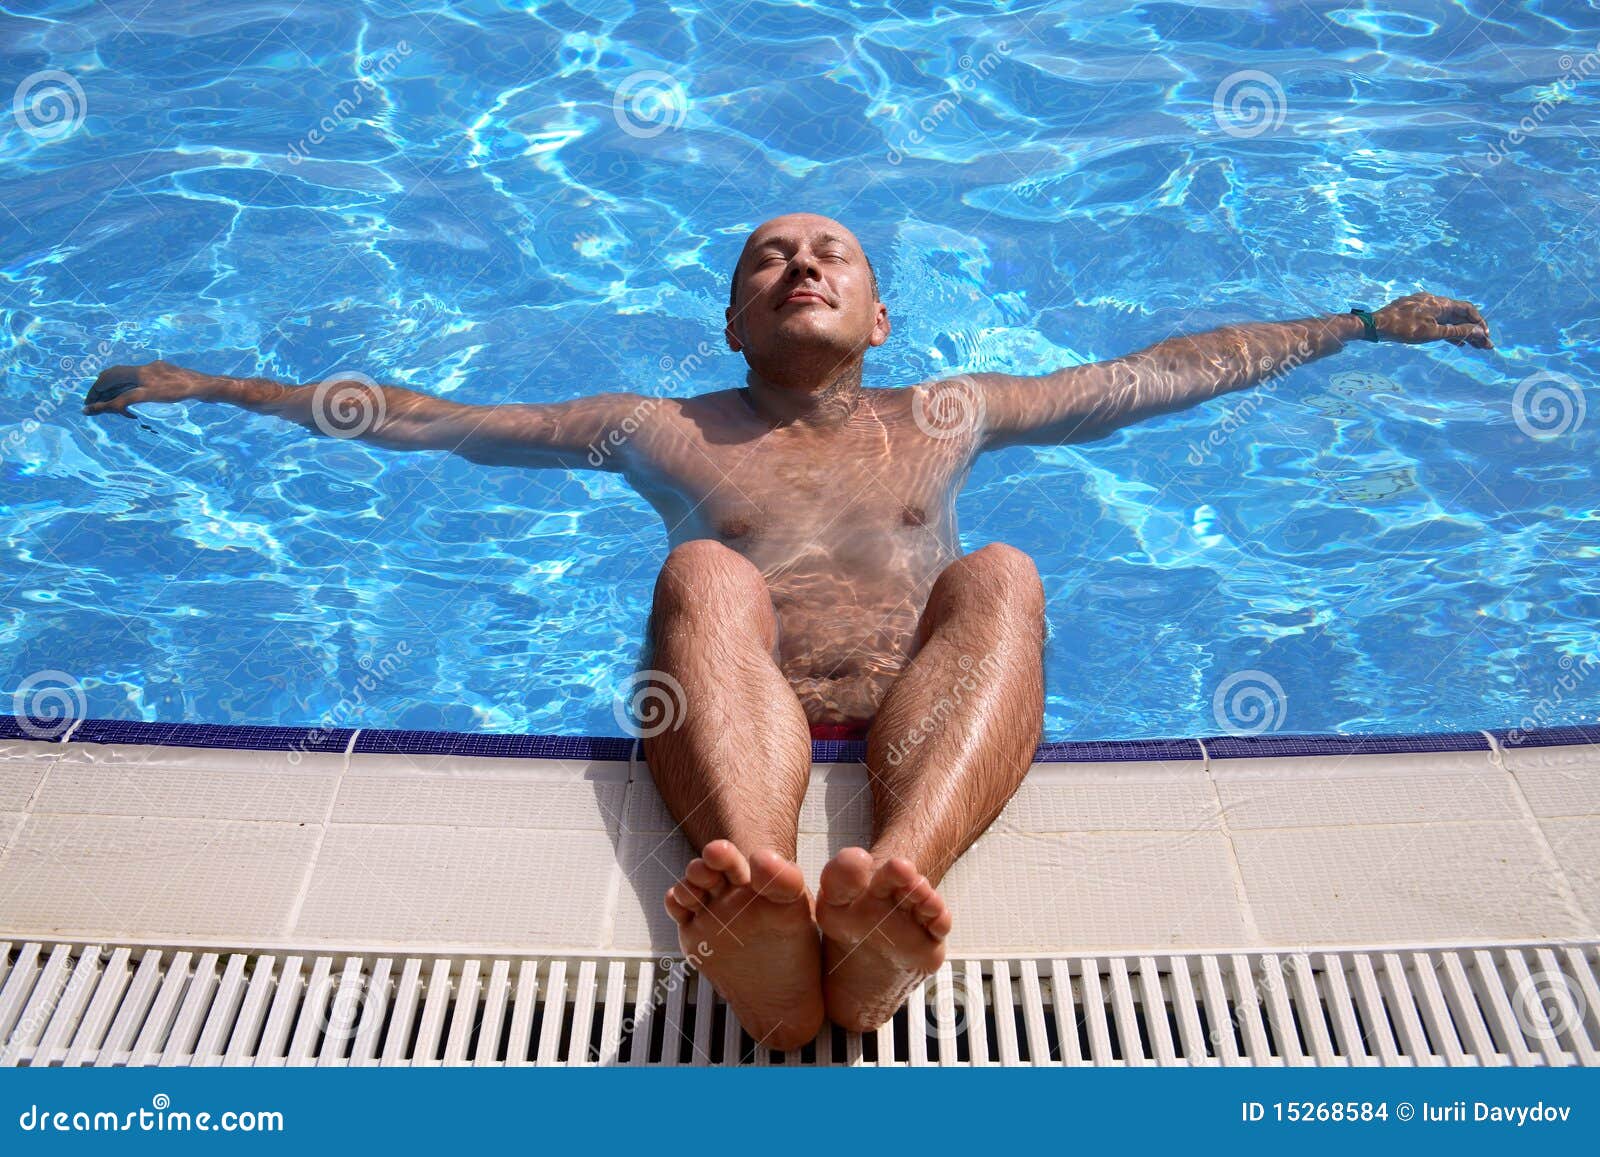 abass moussawi recommends naked men swimming pool pic